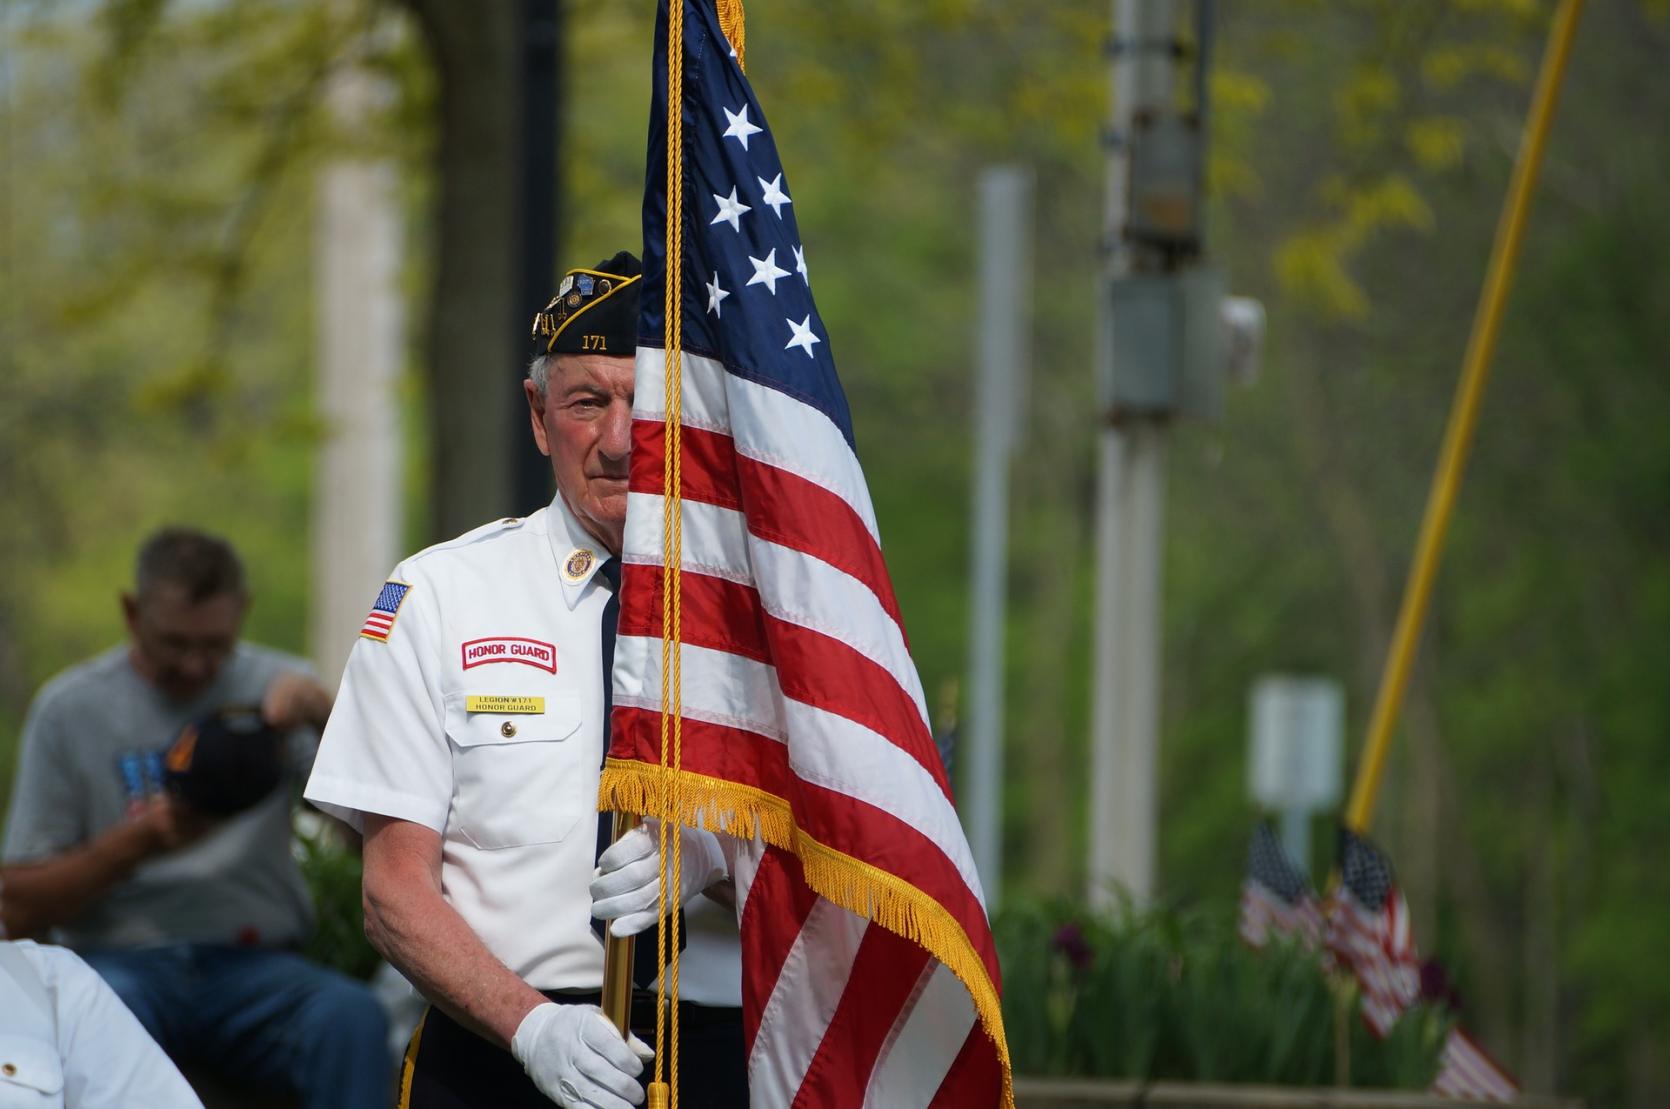 A veteran carrying the United States flag.